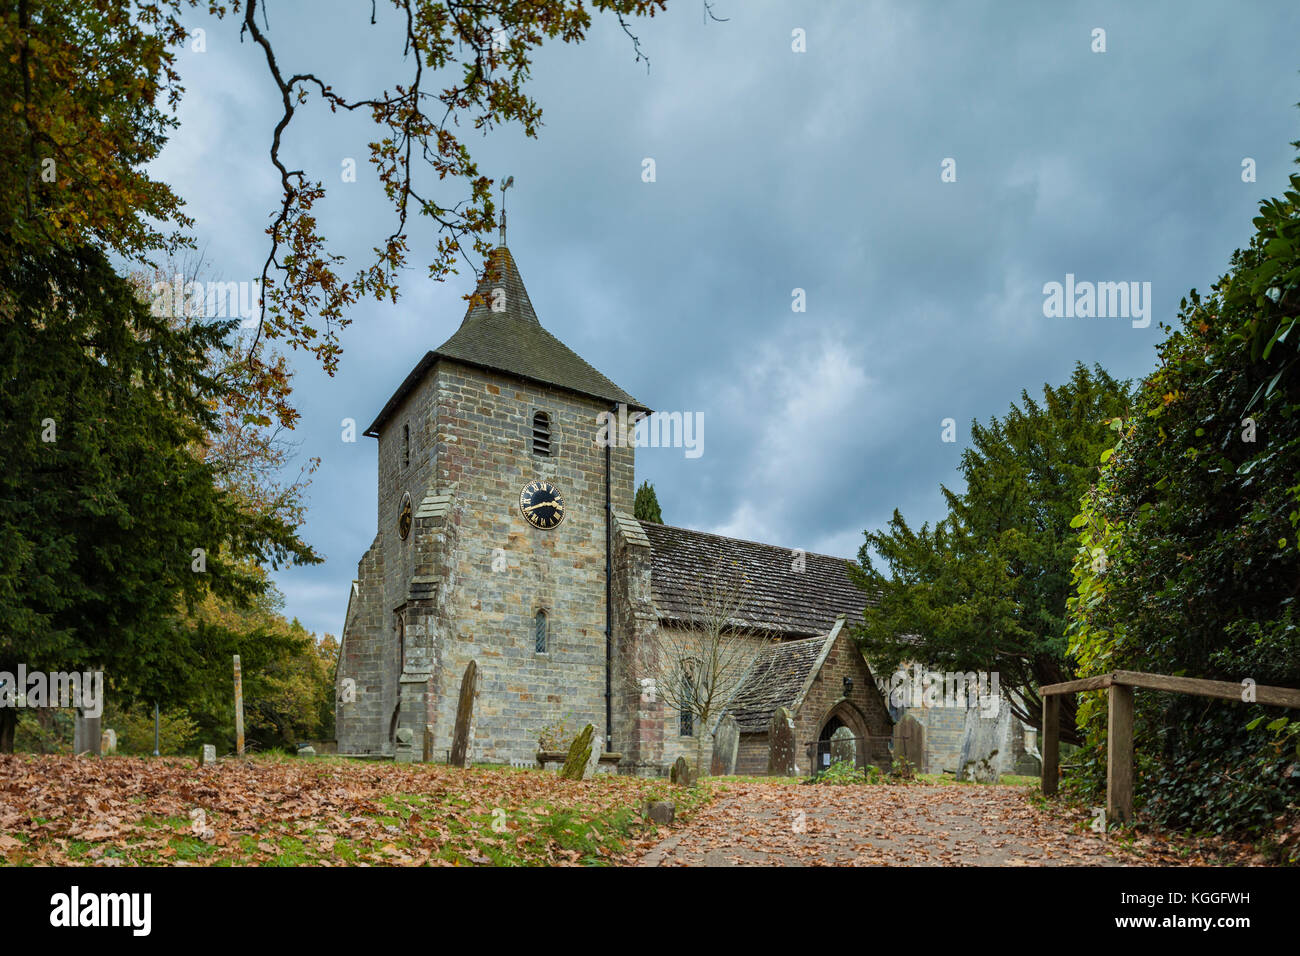 Moody autumn afternoon at St Mary's church in Balcombe, West Sussex, England. Stock Photo